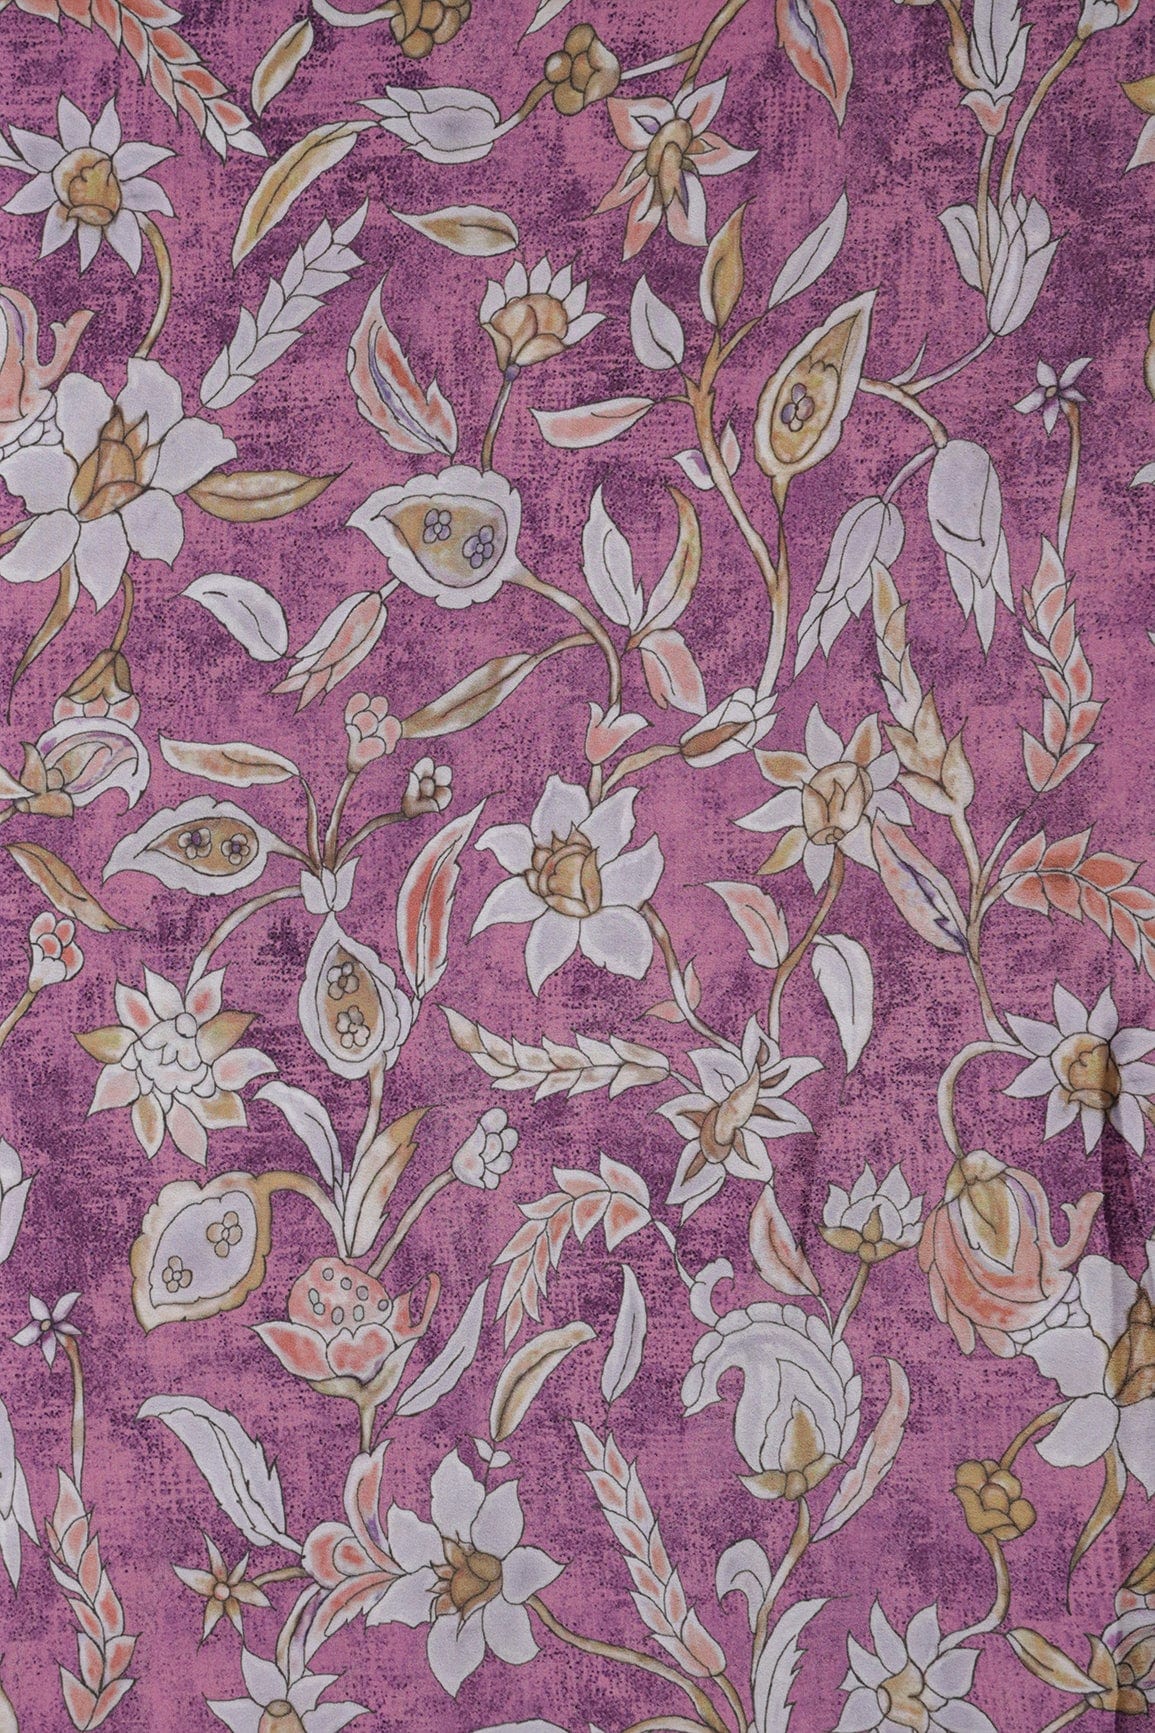 doeraa Prints Brown And Light Grey Floral Pattern Digital Print On Orchid Purple Malai Crepe Fabric